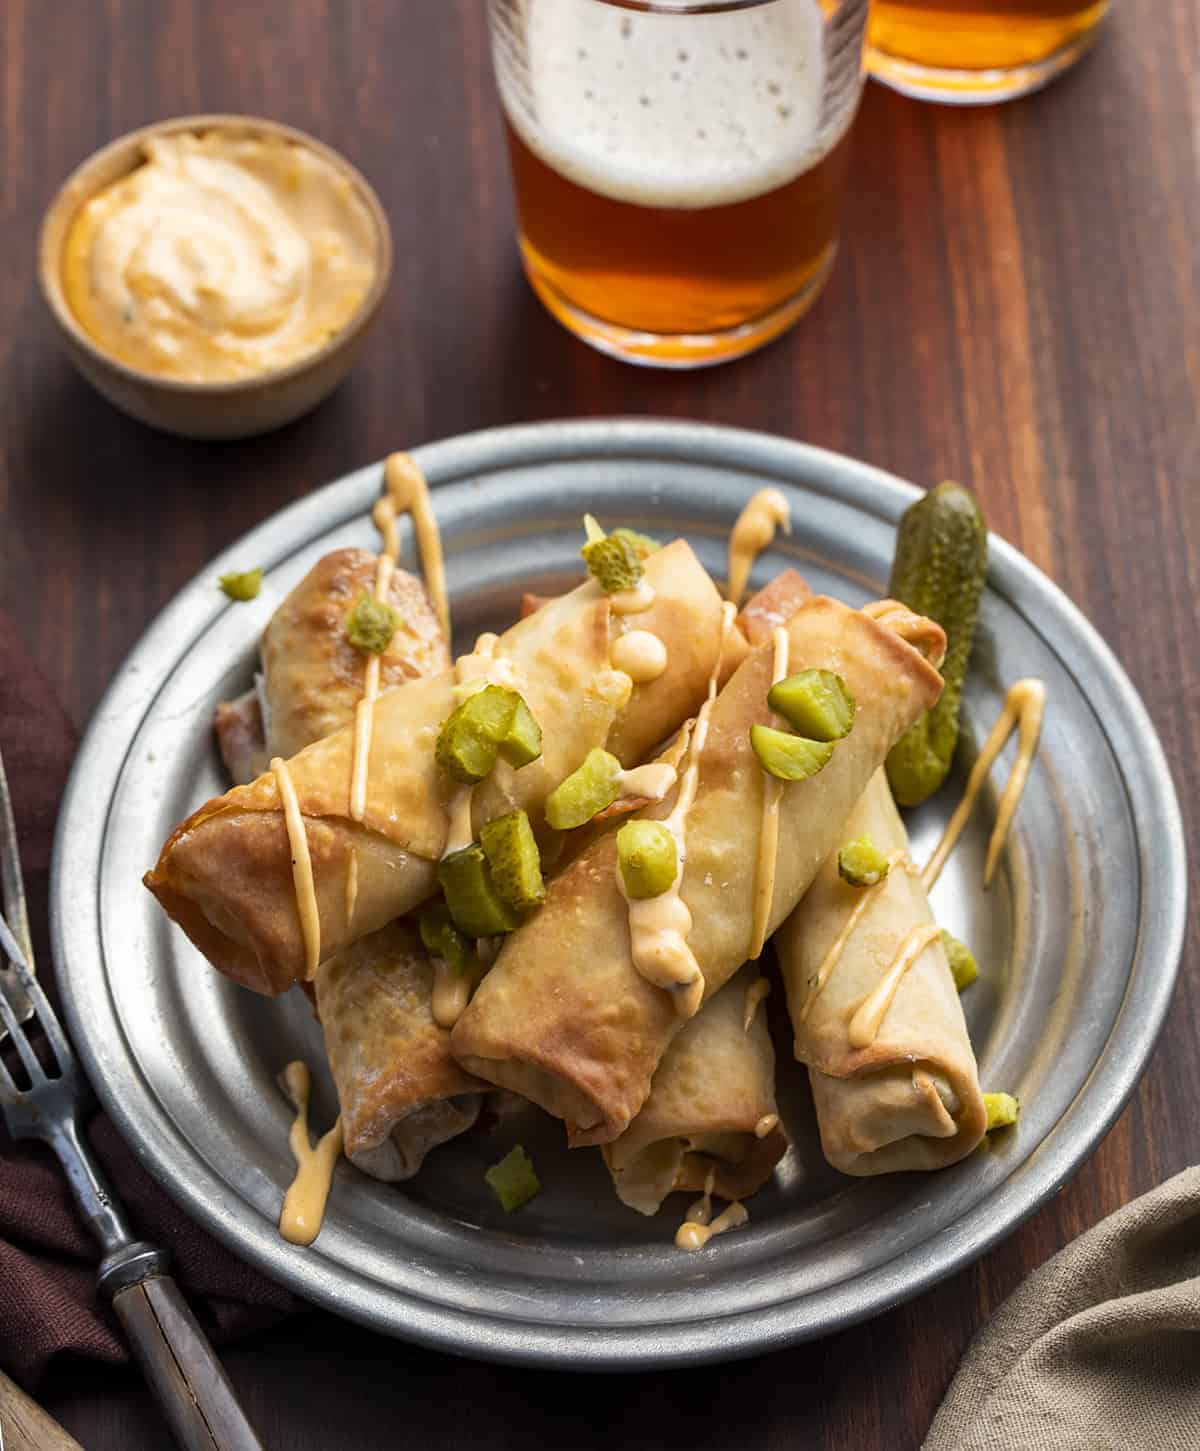 Plate of Air Fryer Dill Pickle Eggrolls with Beer